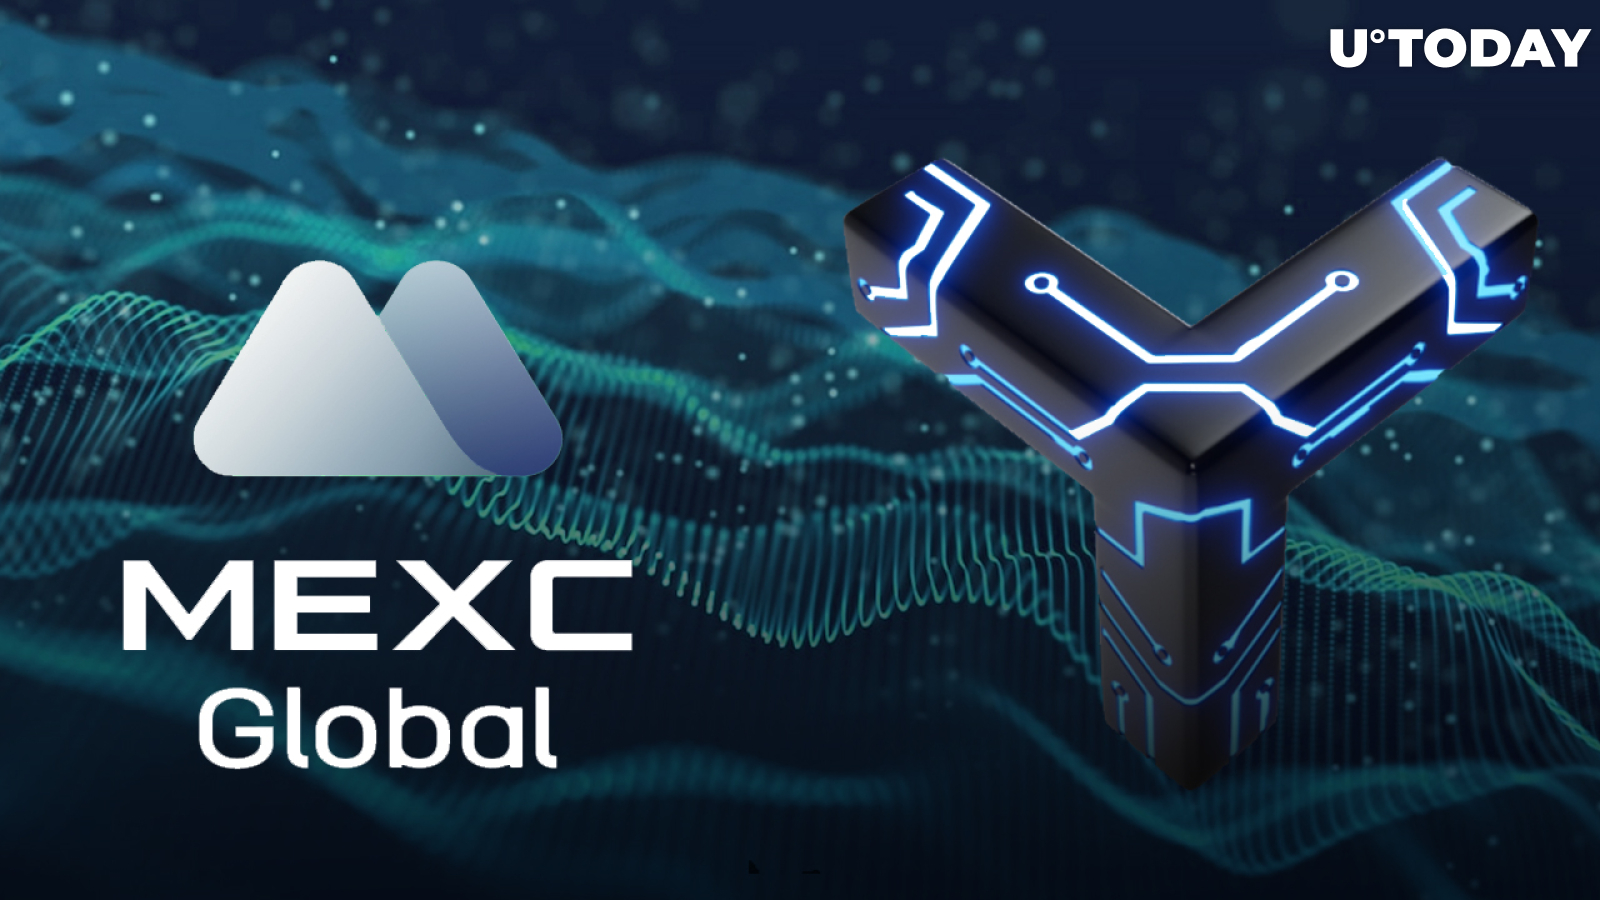 TechPay Coin with 300,000 TPS Bandwith to Get Listed on MEXC Global